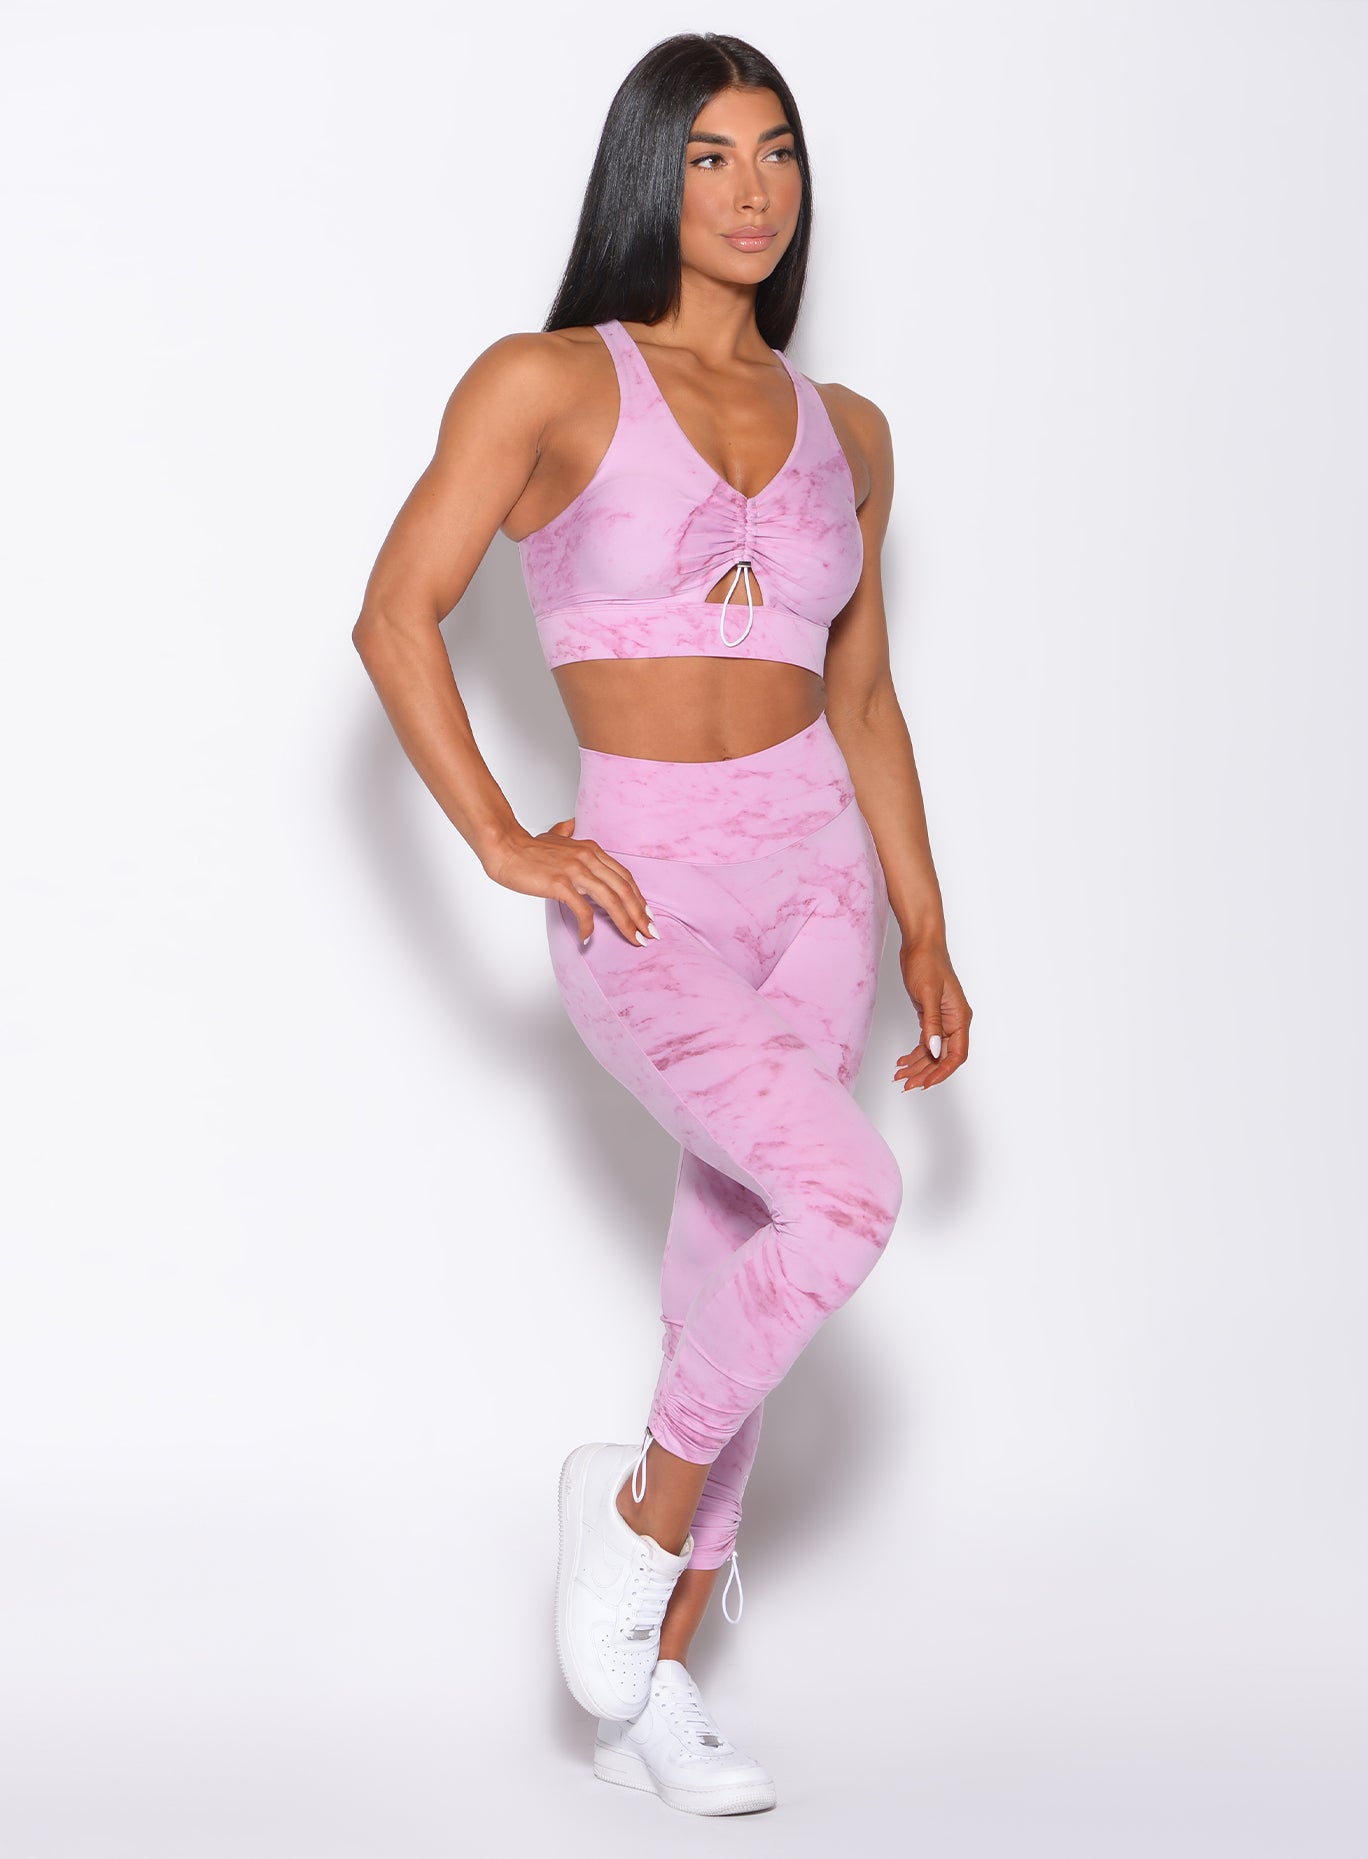 Right side profile view of a model angled right wearing  our adjustable leggings in marble pink color and a matching bra